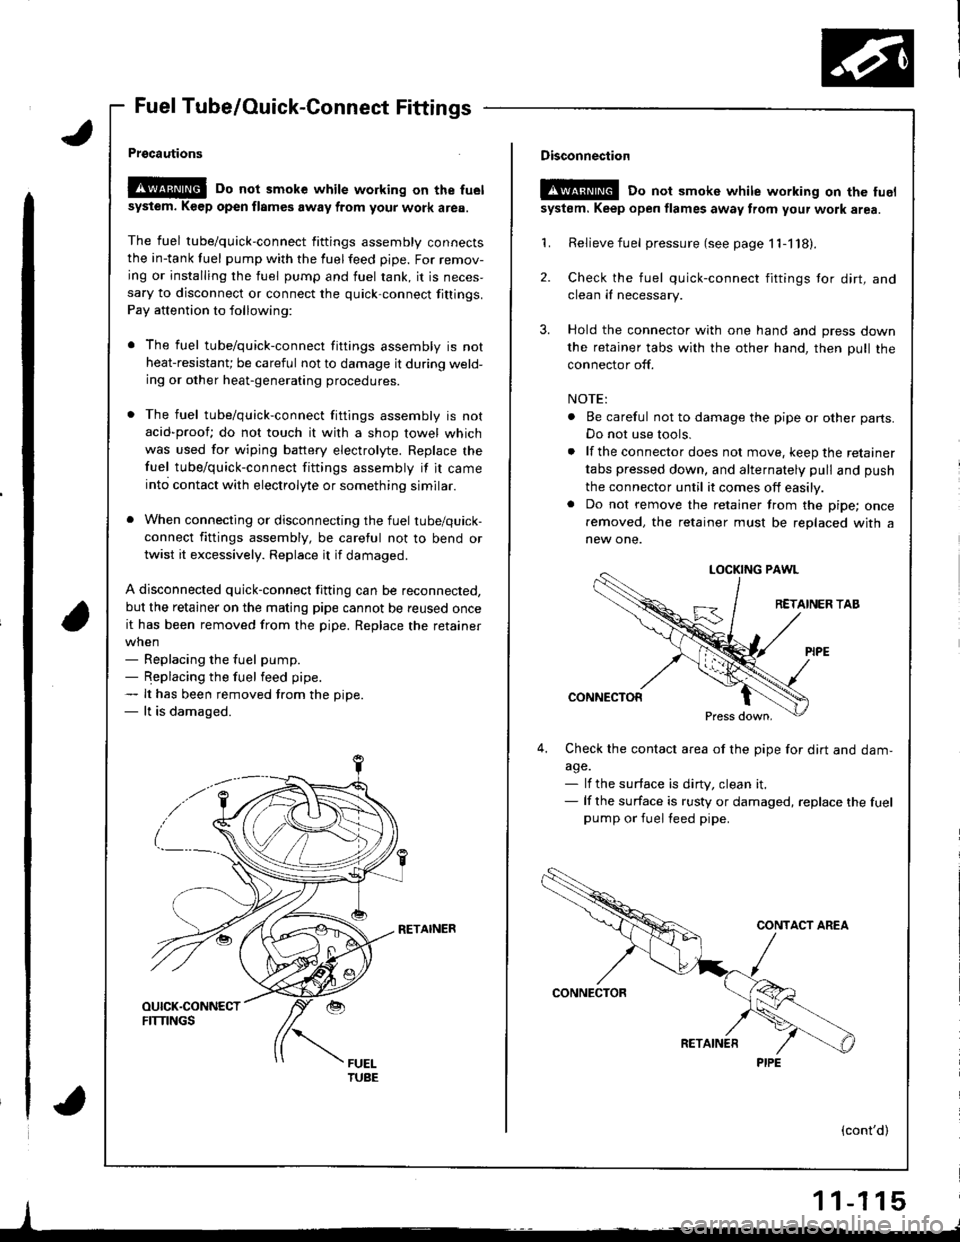 HONDA INTEGRA 1998 4.G Workshop Manual Fuel Tube/Ouick-Connect Fittings
Prgcautions
!@@ Do not smoke while working on the fuel
sysiem. K€ep open flames away from your work area.
The fuel tube/quick-connect fittings assembly connectsthe i